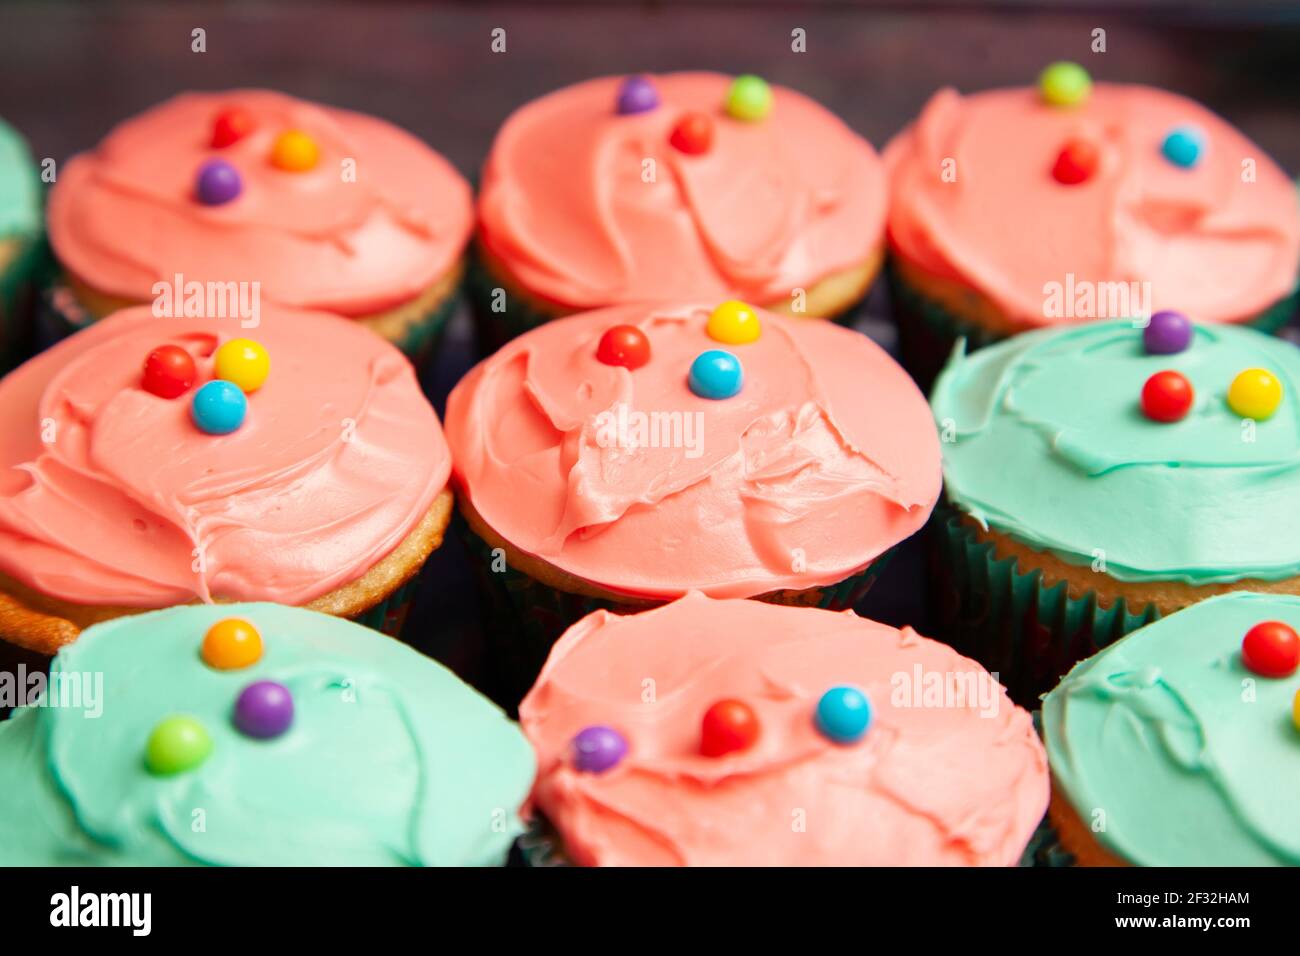 cupcakes with icing in colours of greenish blue and pink Stock Photo